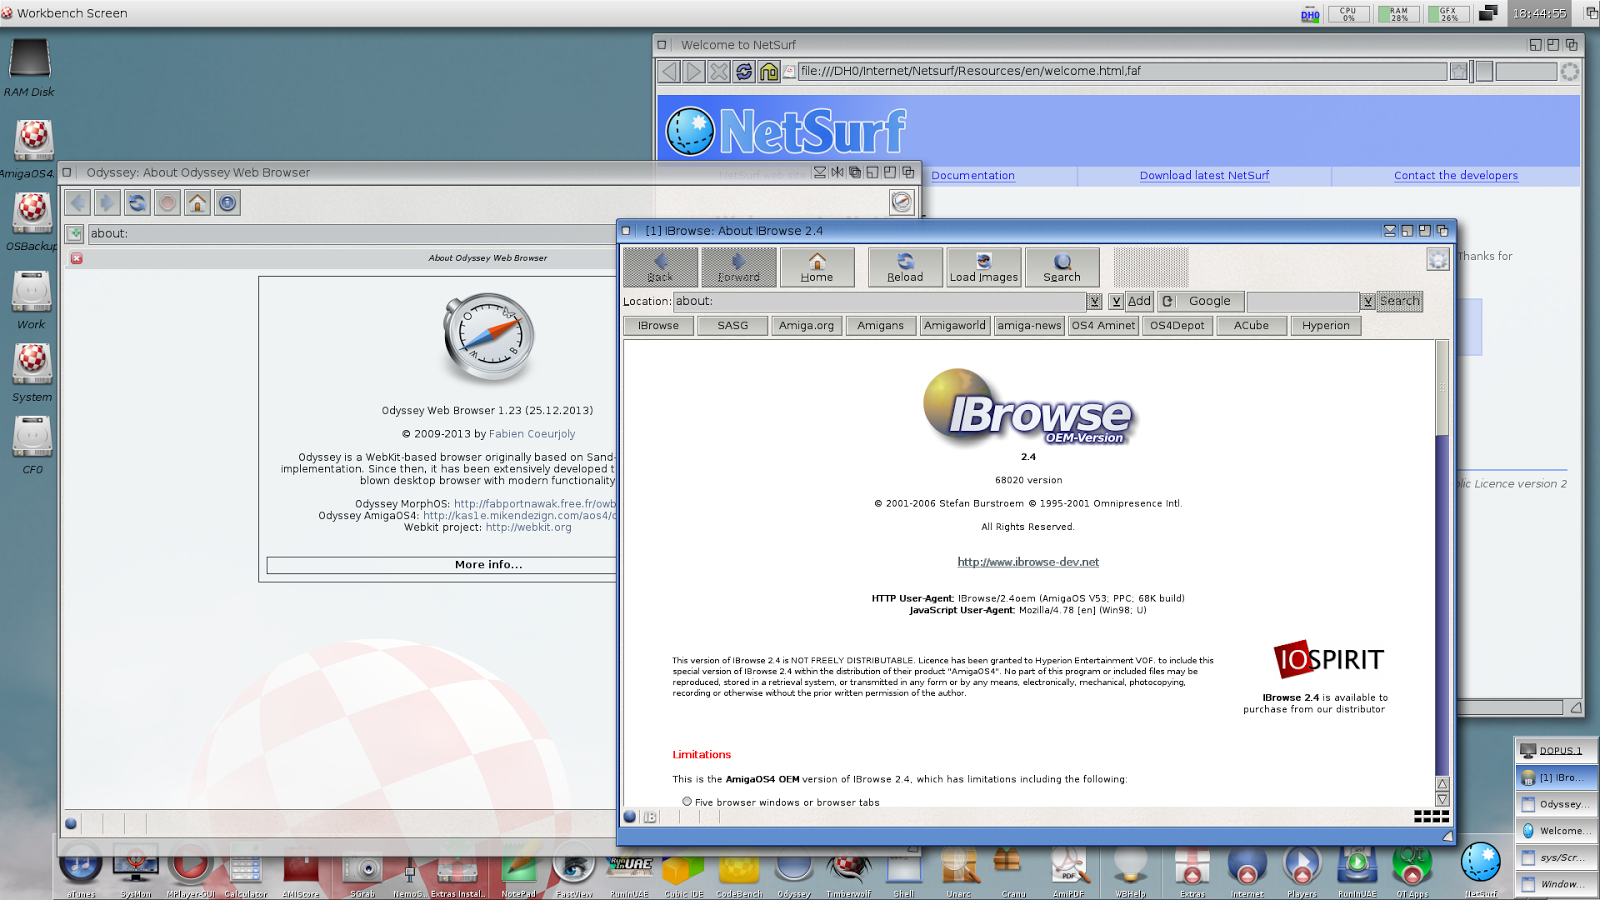 AmigaOS 4.1 Web Browsers in 2015 on X1000.